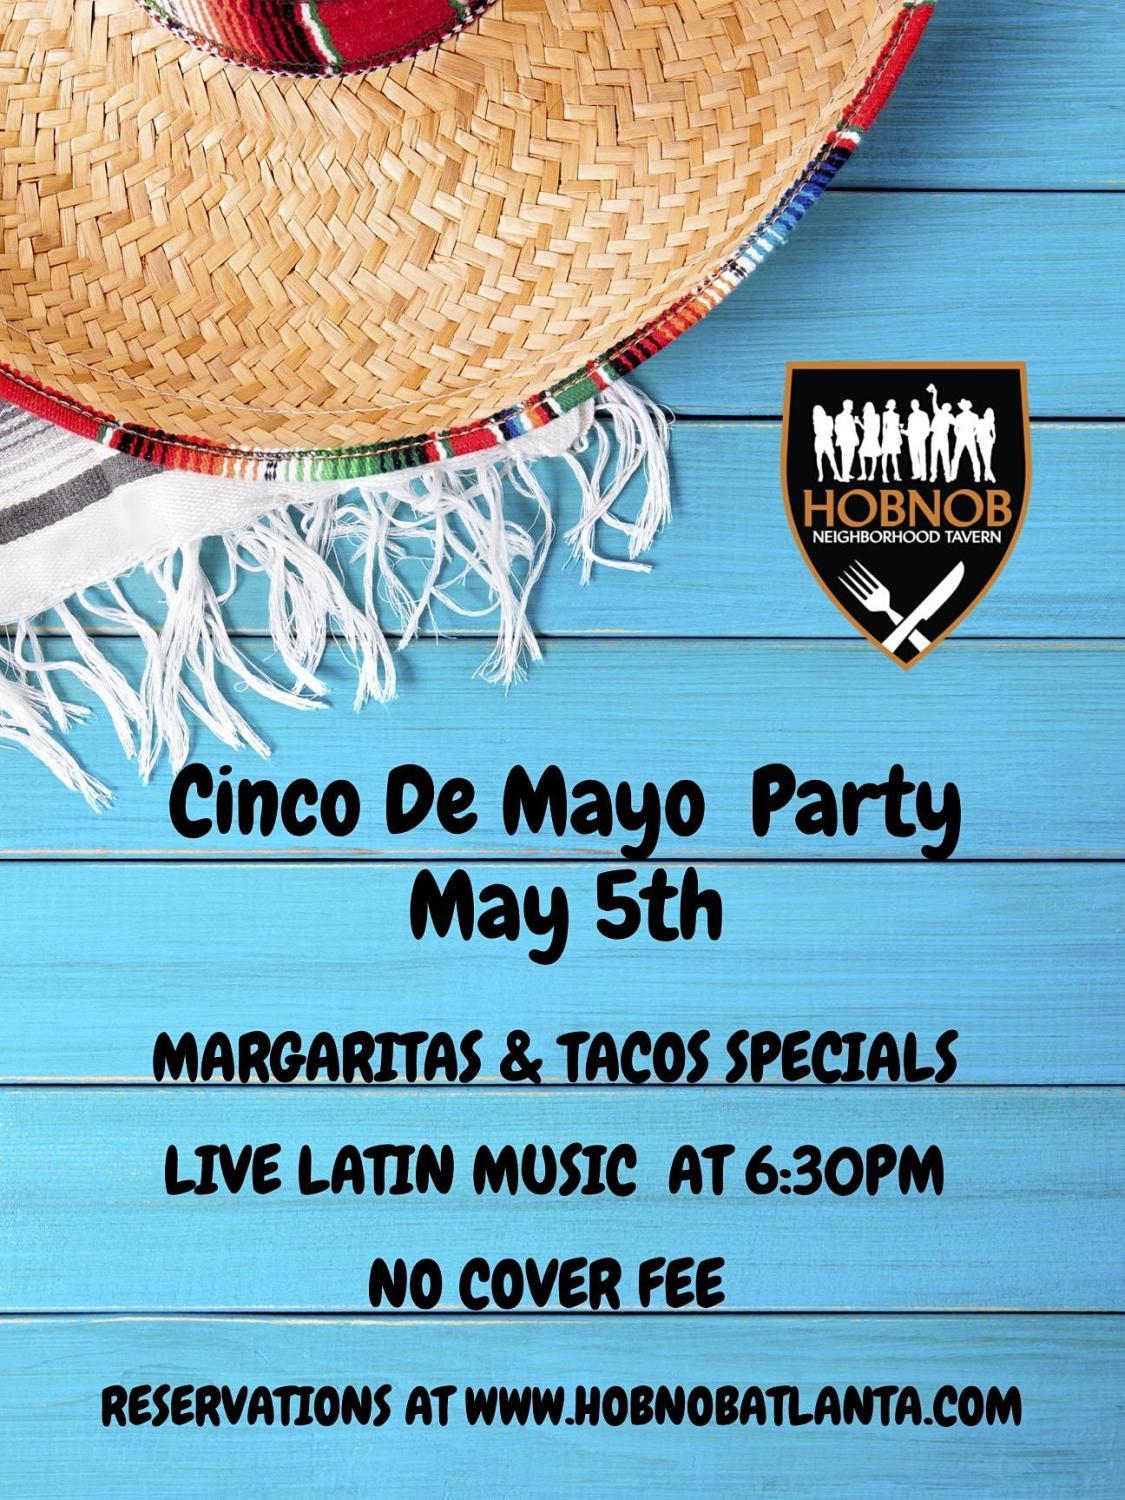 CINCO DE MAYO PARTY AT ATLANTIC STATION- GET READY FOR FUN!